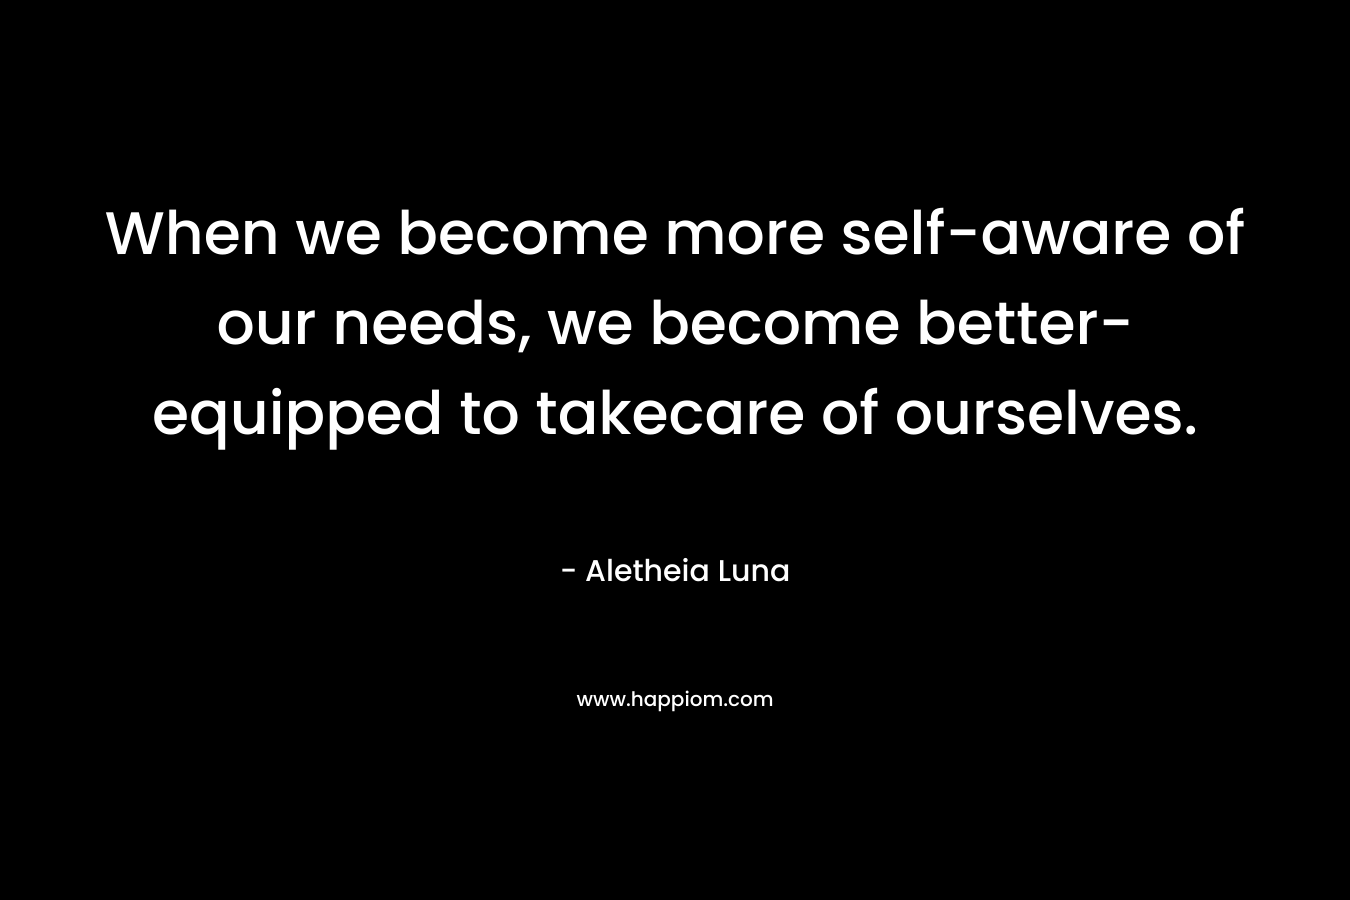 When we become more self-aware of our needs, we become better-equipped to takecare of ourselves.